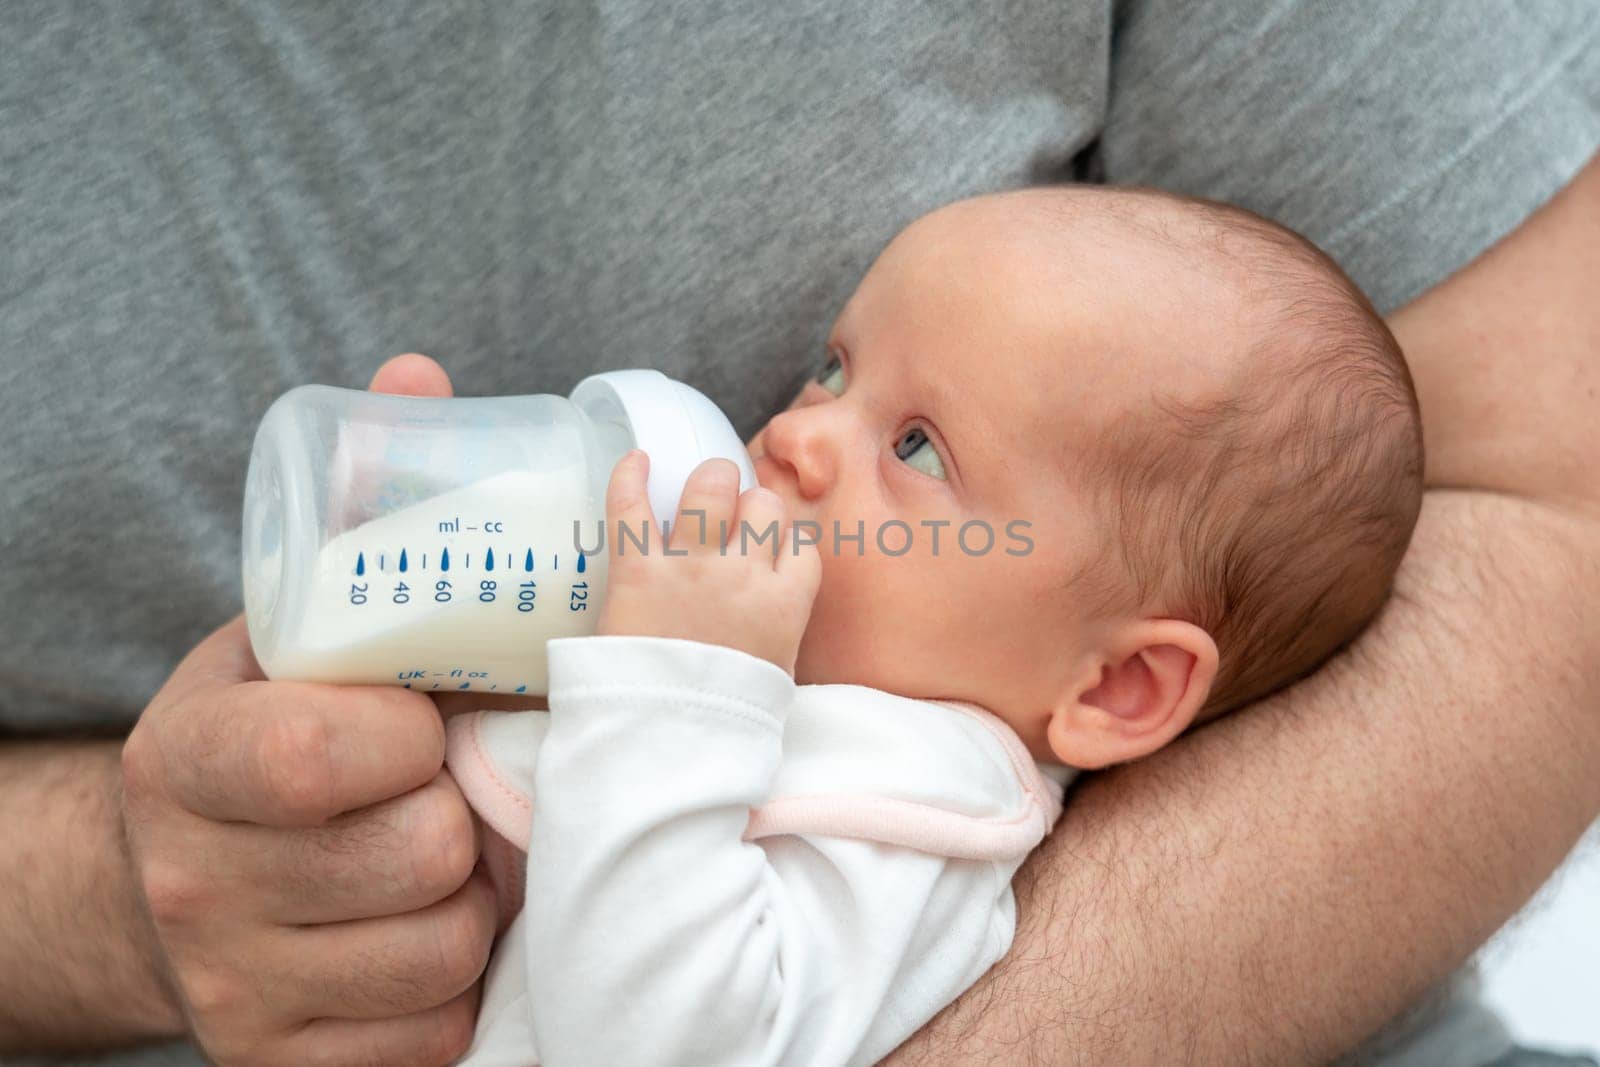 A man embarks on the rewarding journey of fatherhood, tenderly feeding his baby formula from a